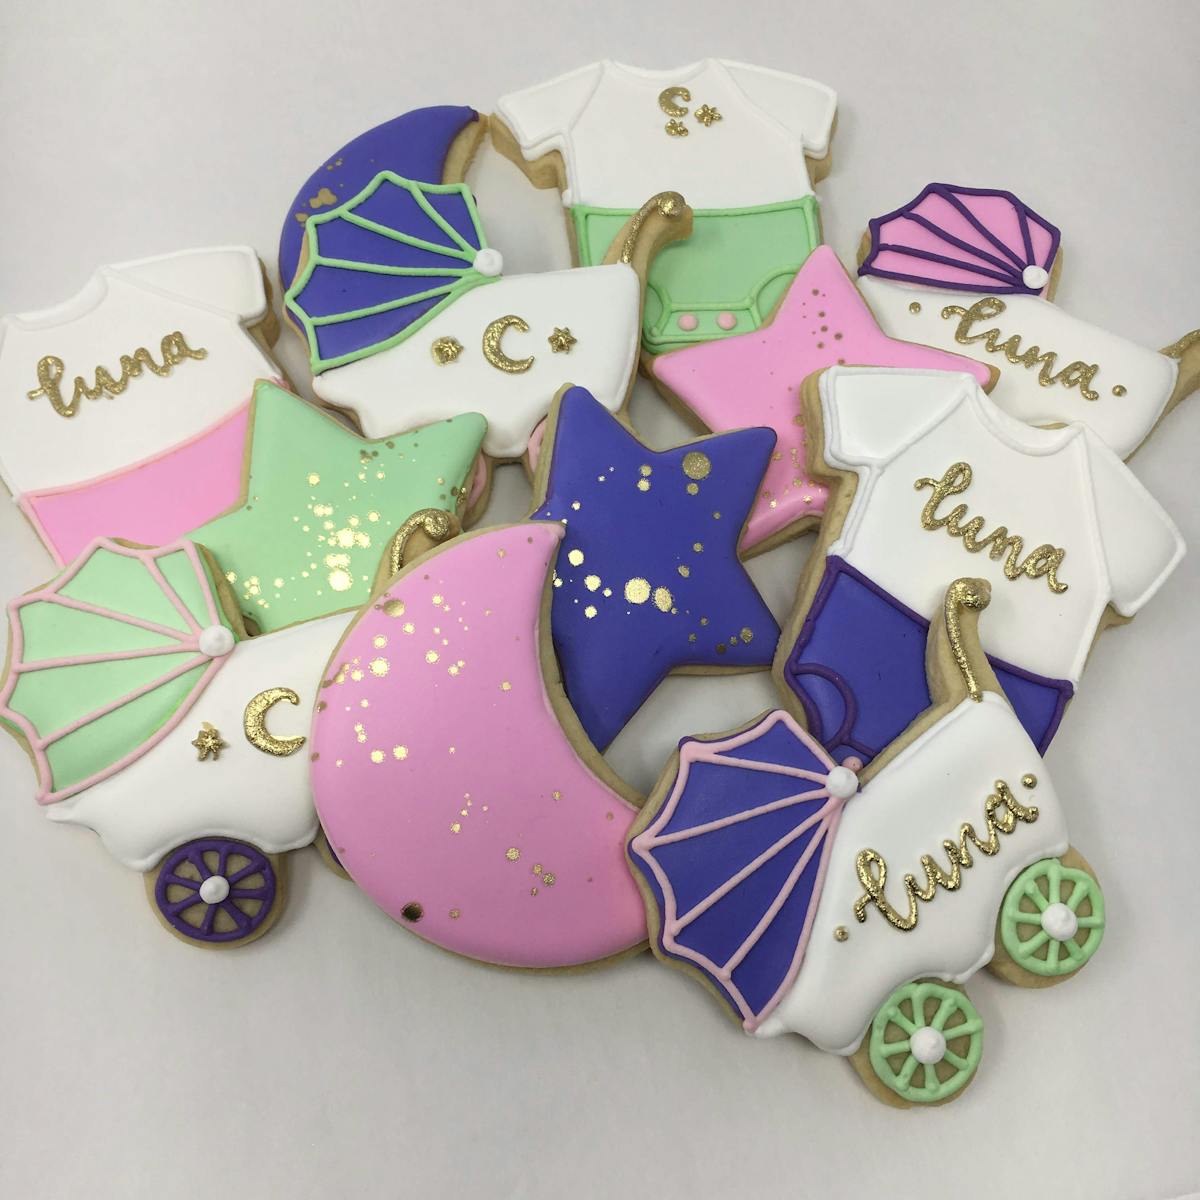 pram, moon, onesies, and star cookies for a lunar themed baby shower